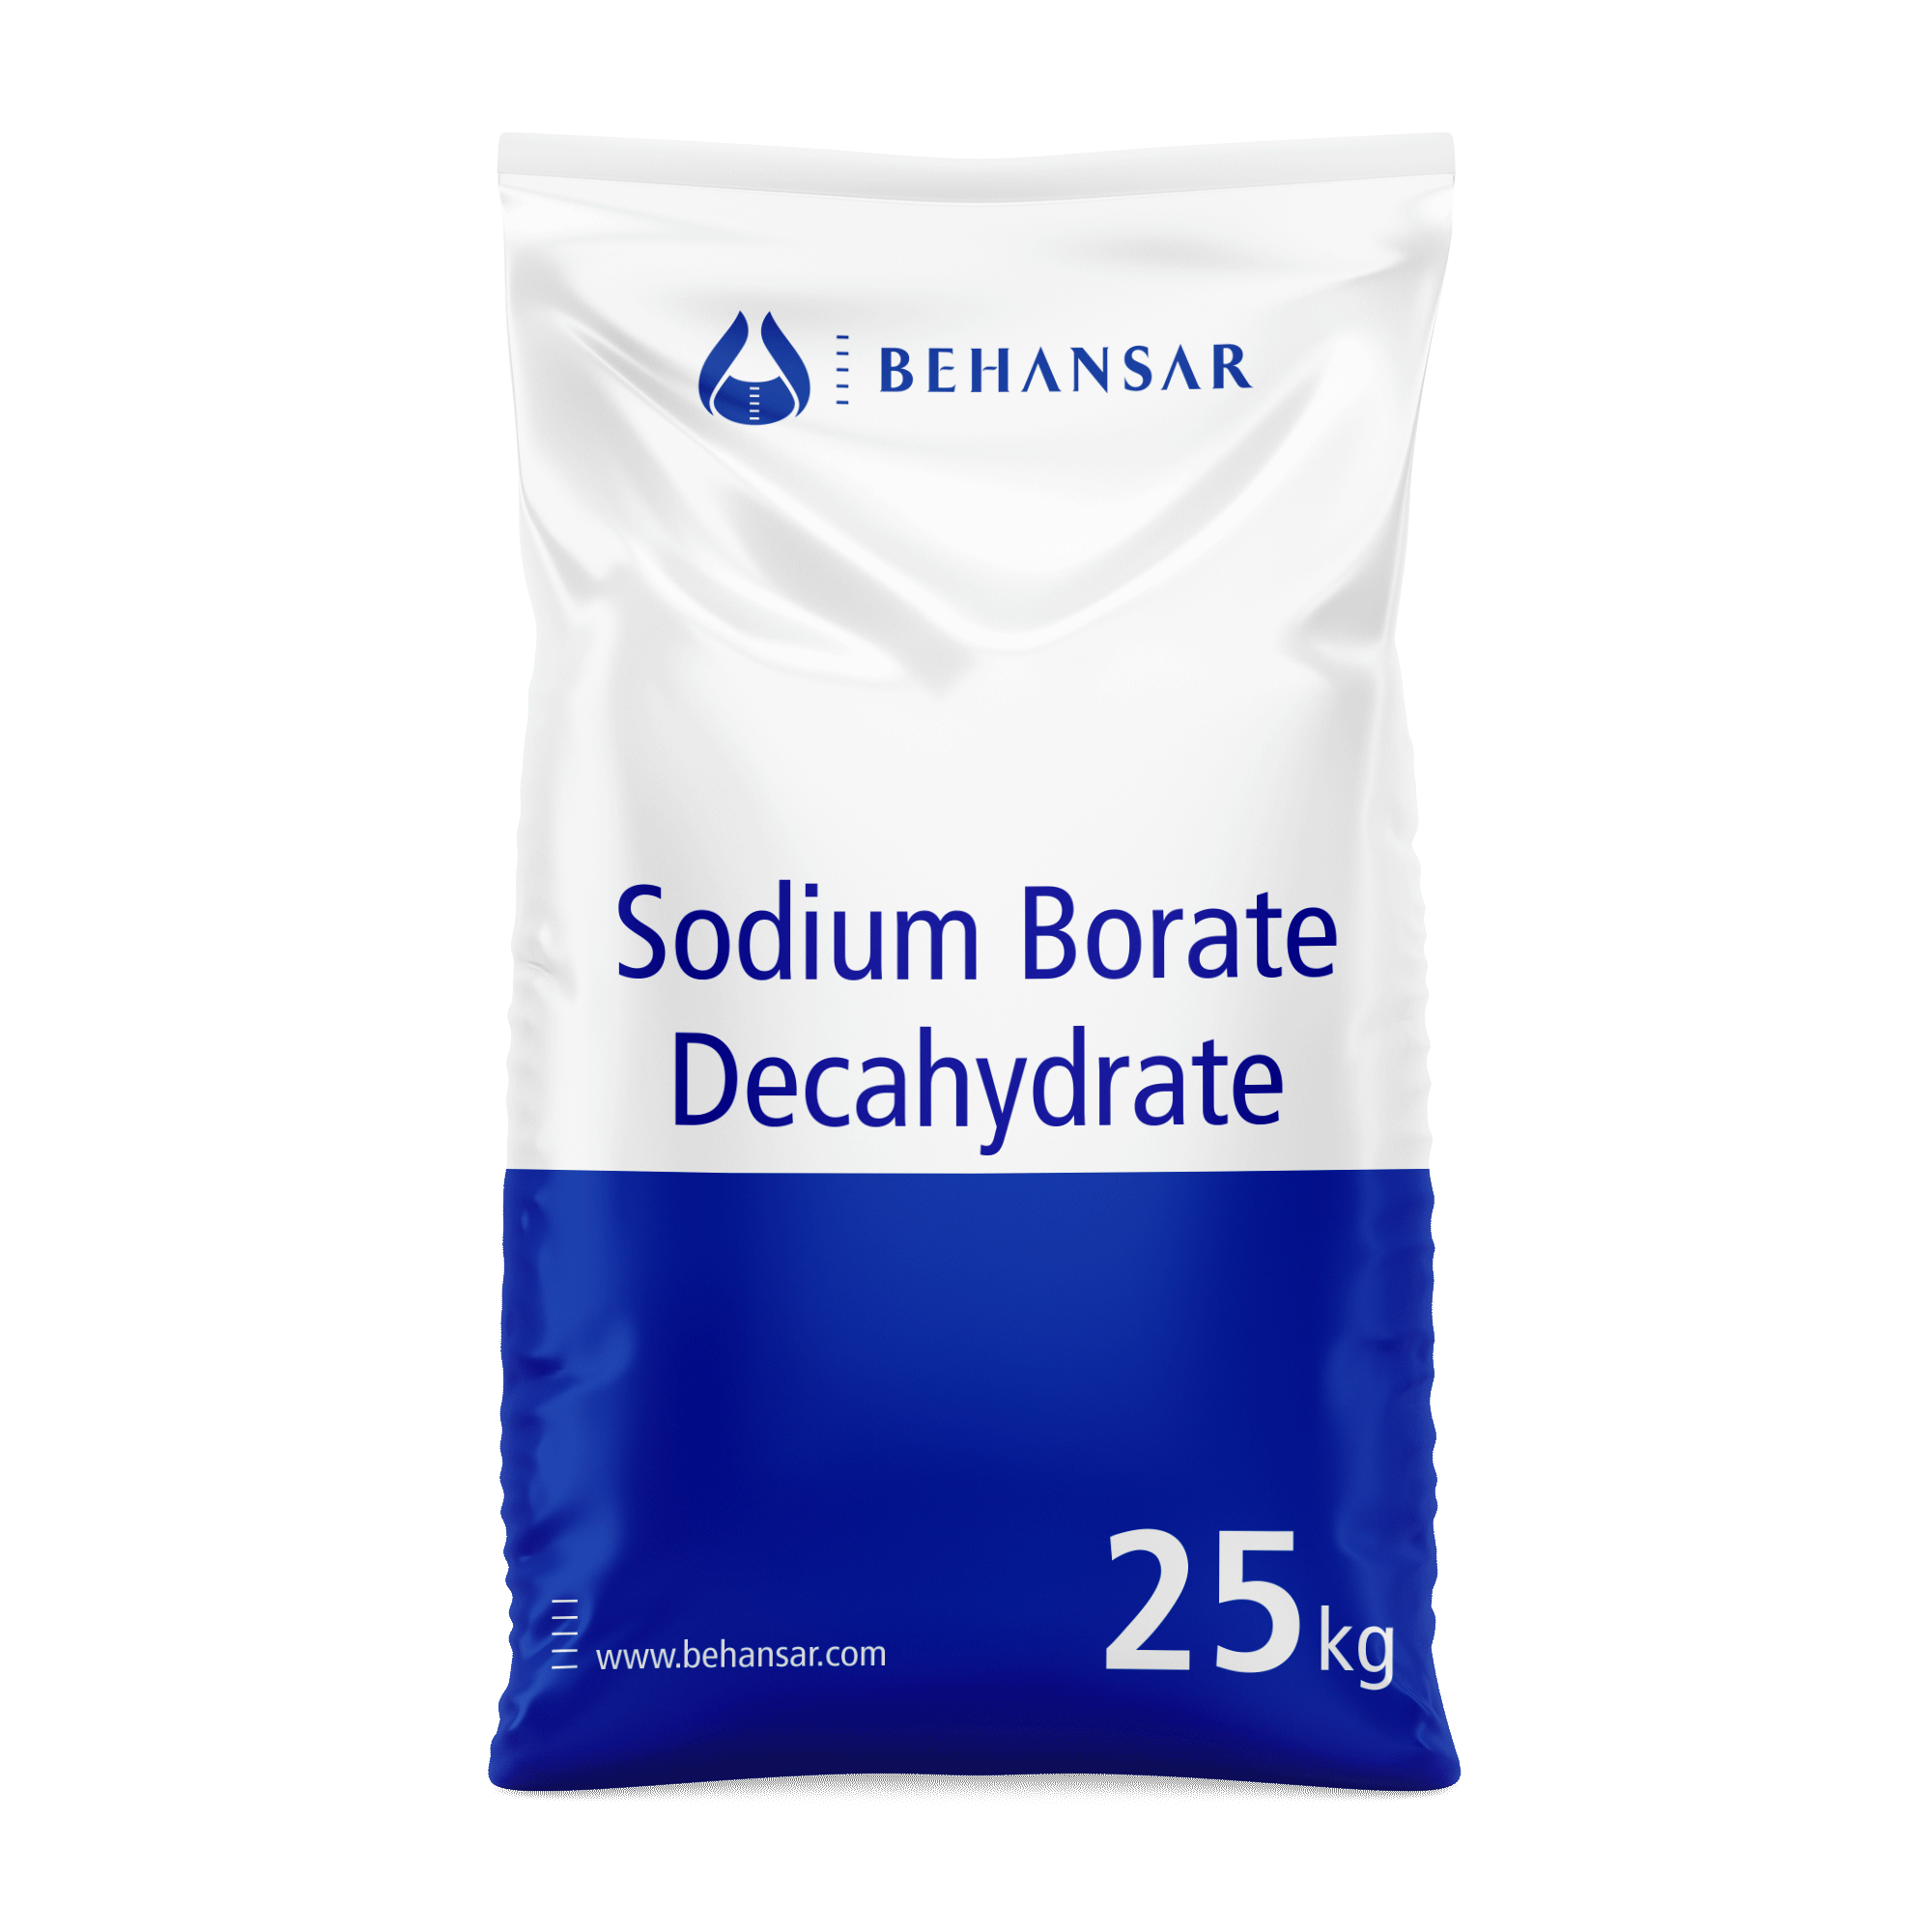 Sodium Borate Decahydrate is one of the products of Behansar Co